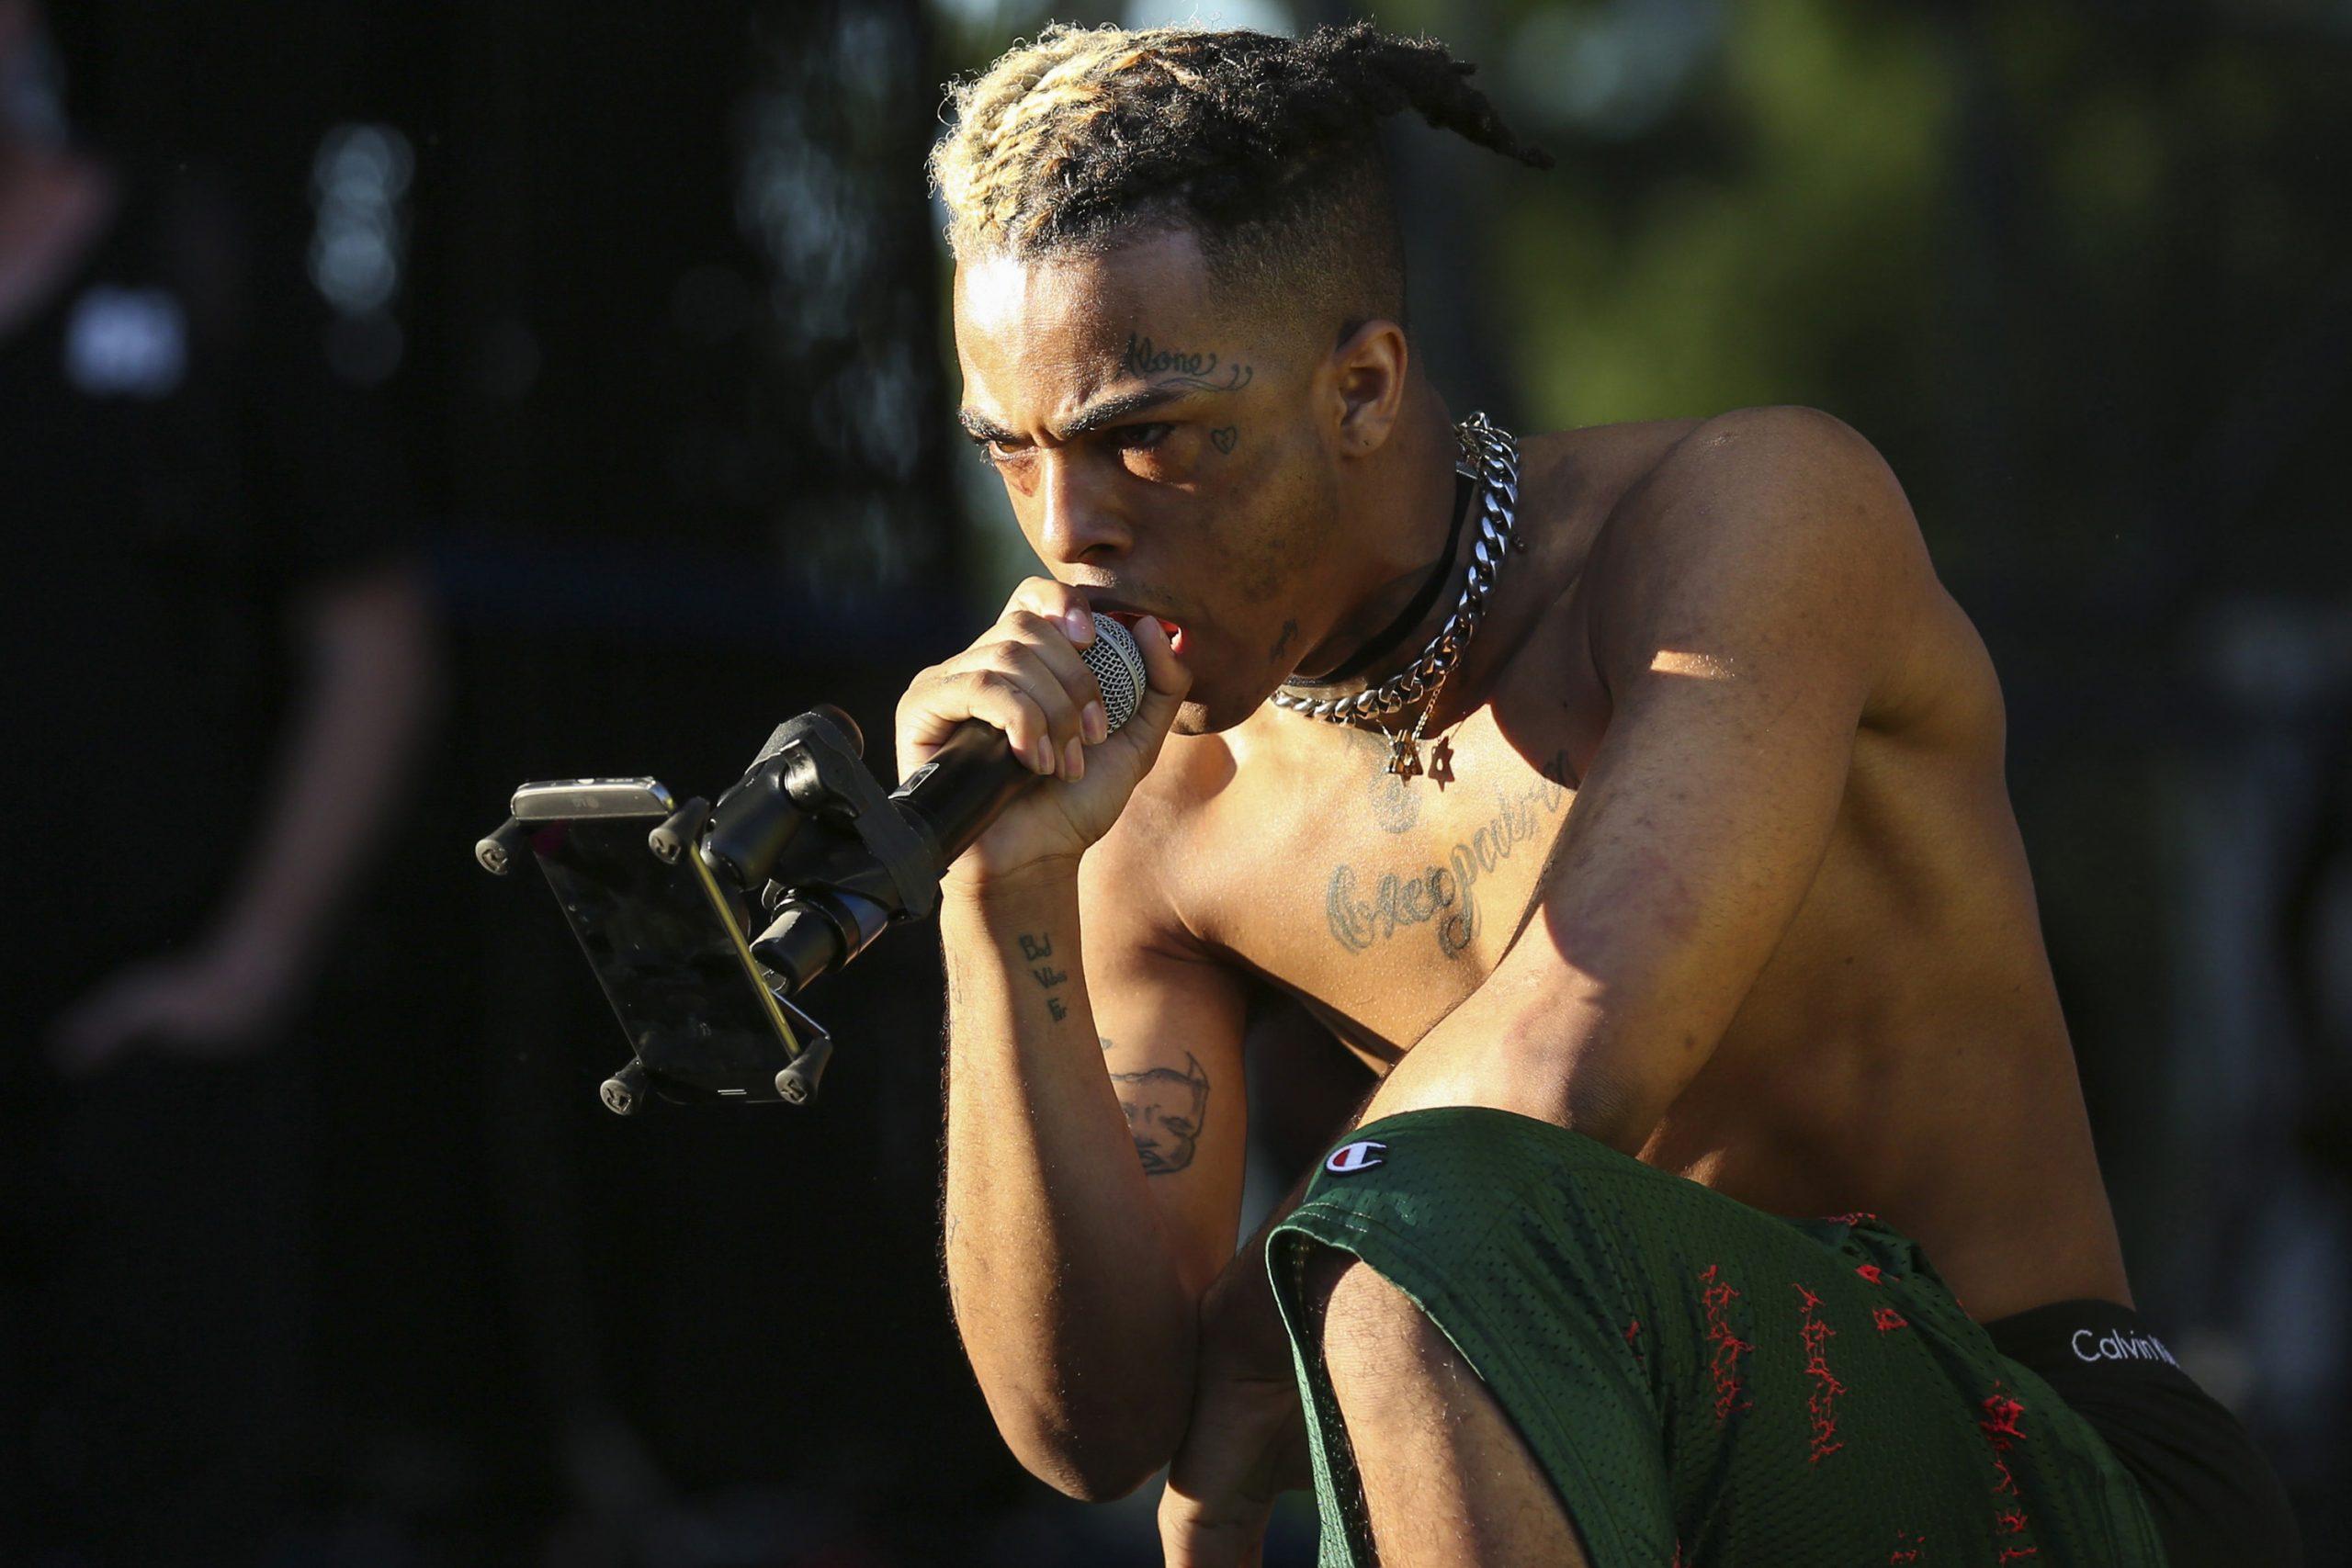 XXXTentacion performs during the second day of the Rolling Loud Festival in downtown Miami on May 6, 2017. (Matias J. Ocner/Miami Herald/TNS)